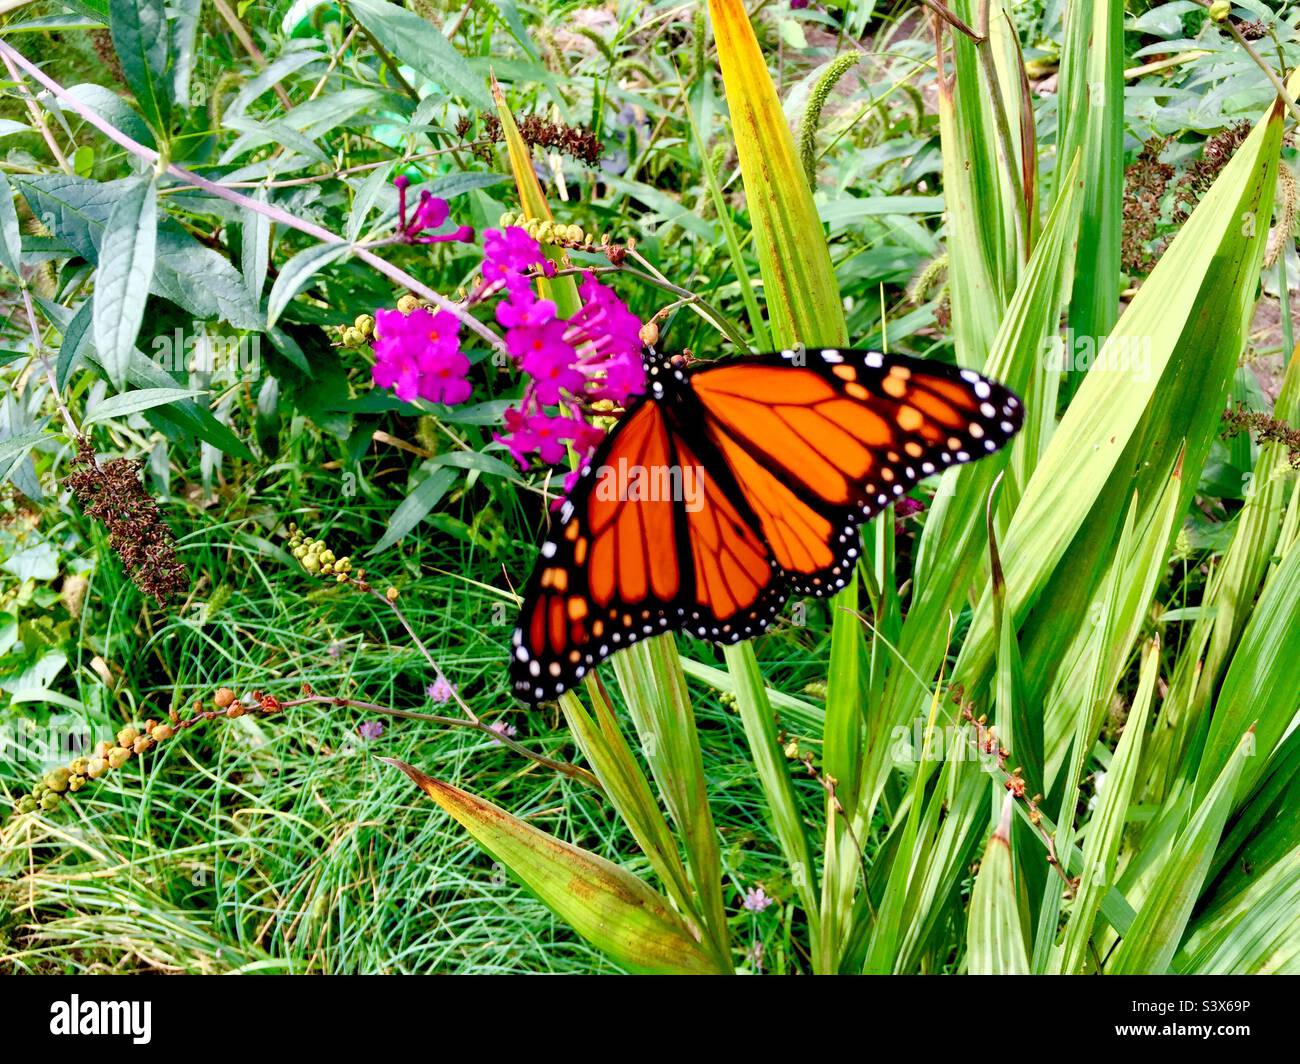 A majestic Monarch butterfly feasting on a Buddleia blossom, Ontario, Canada. Conducive habitat. Unfurled. Diagonal composition. Stock Photo